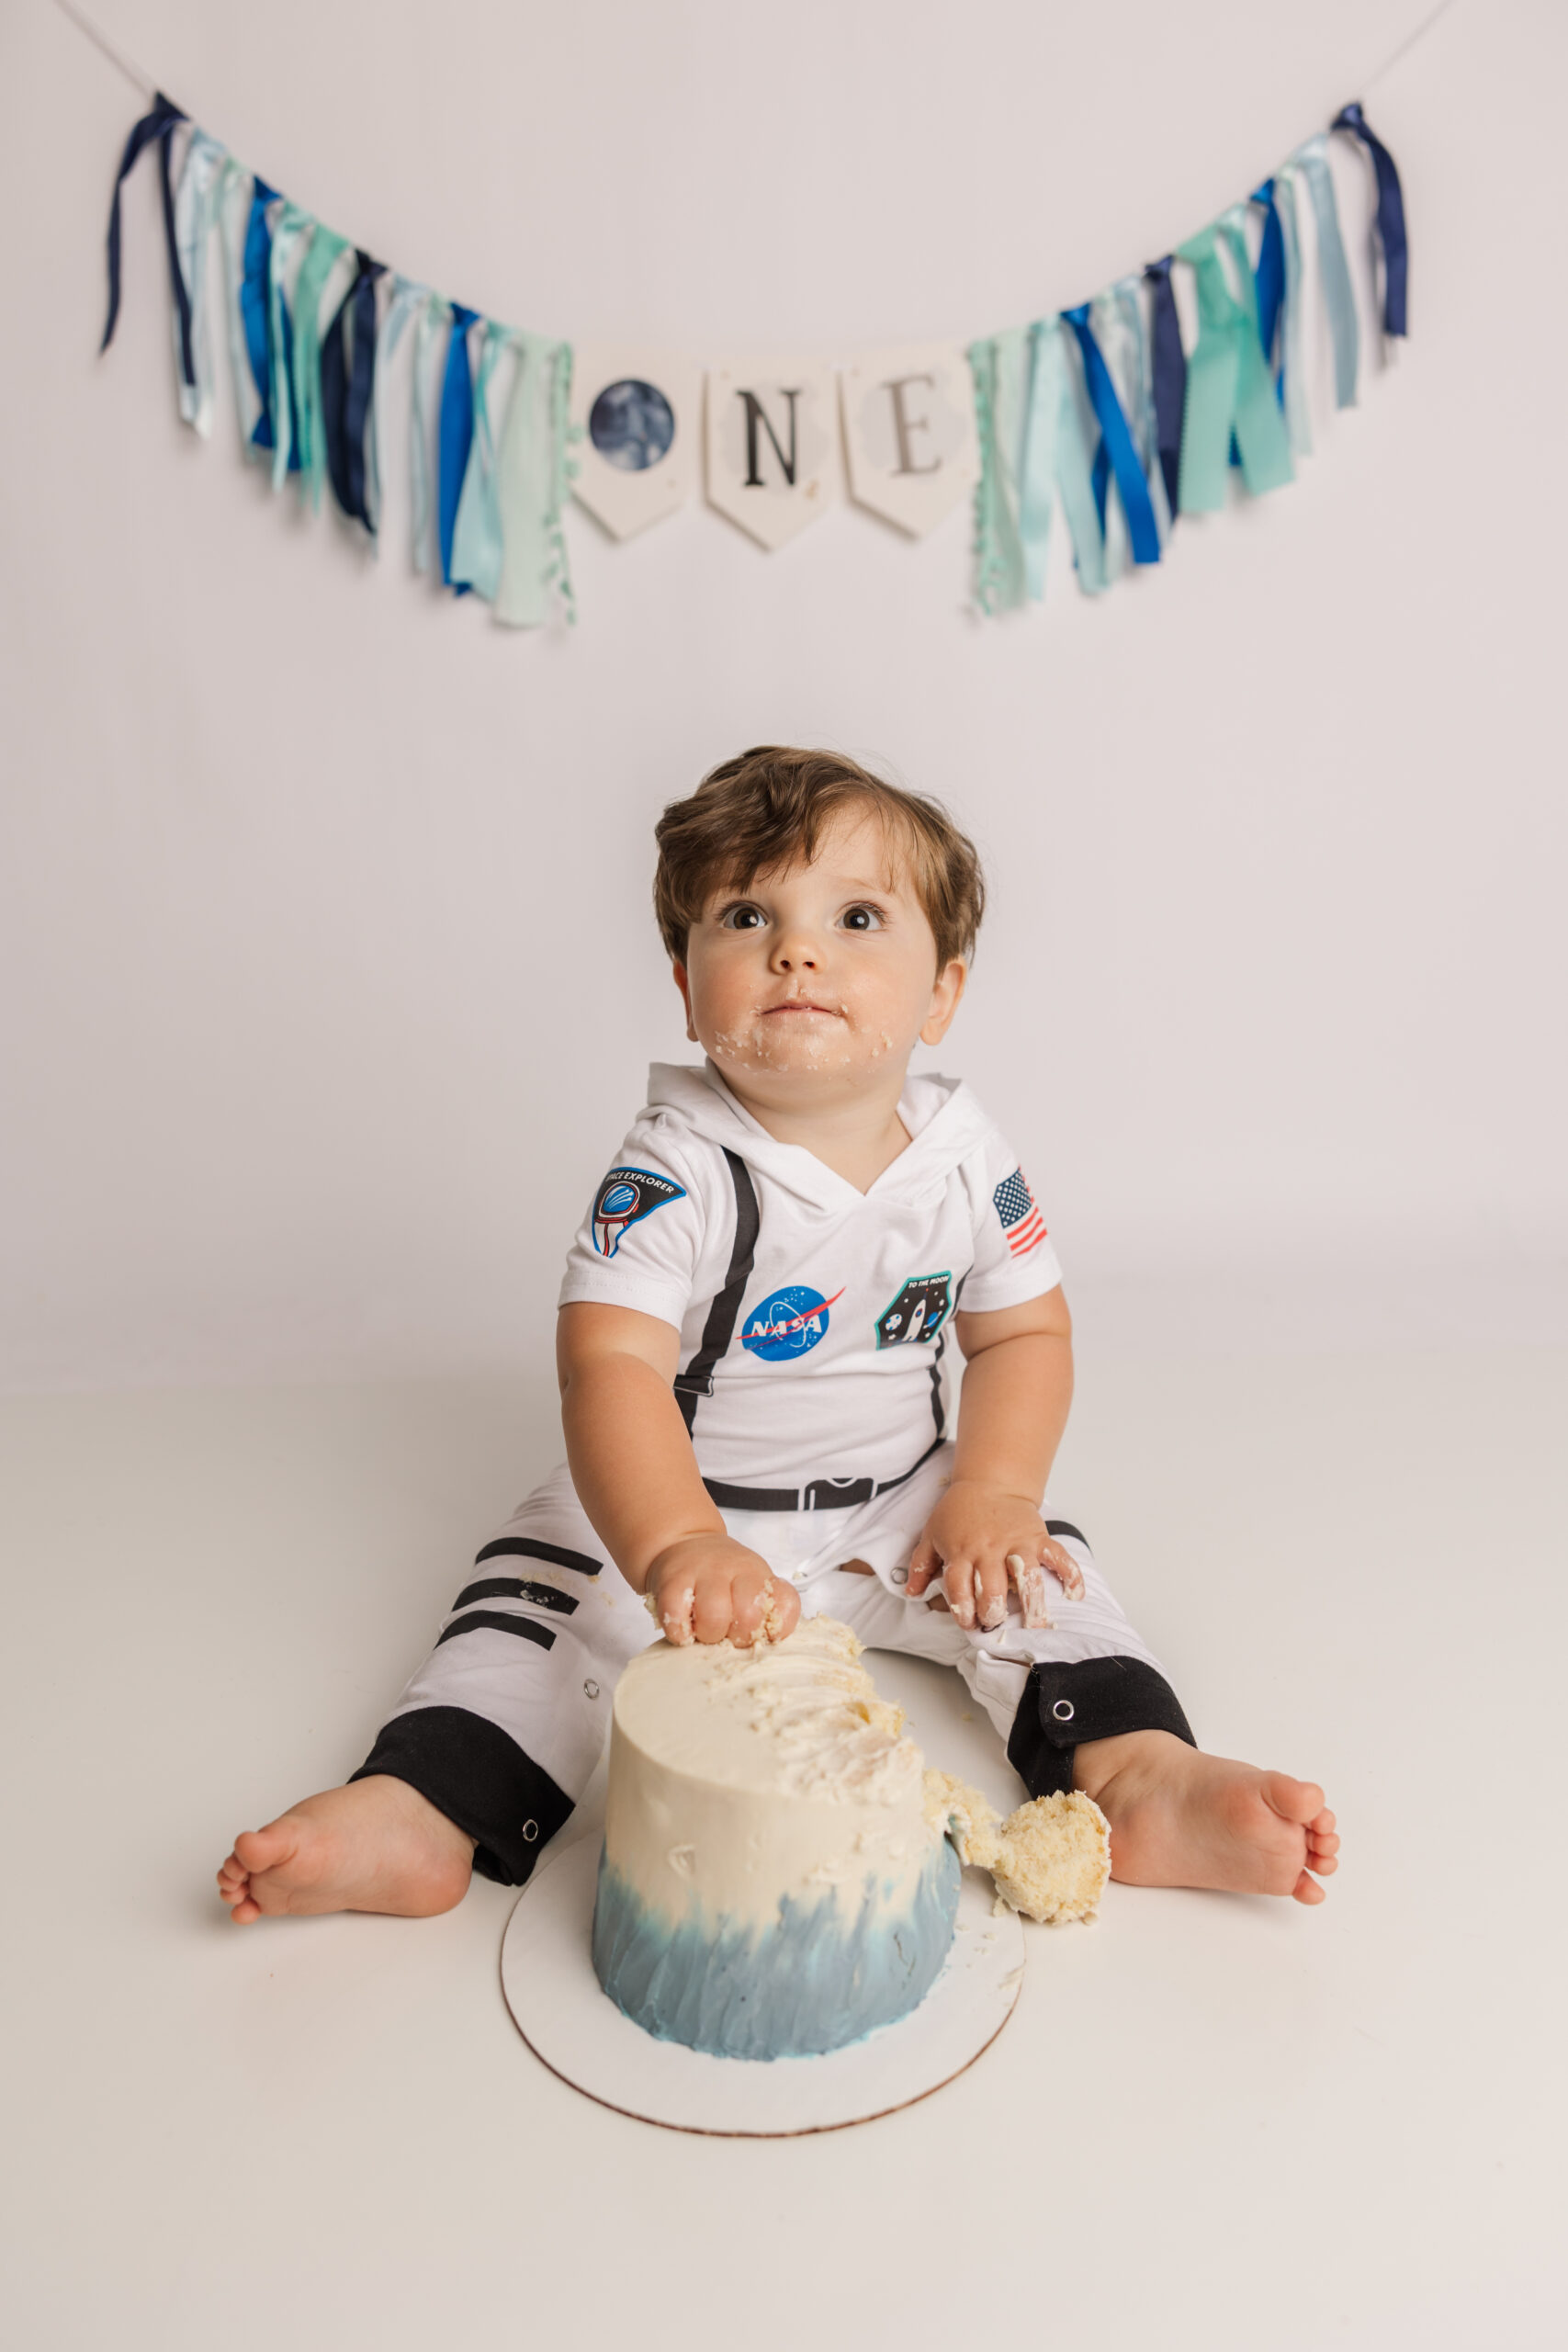 One year old enjoying his space themed cake smash during his recent one year celebration session.